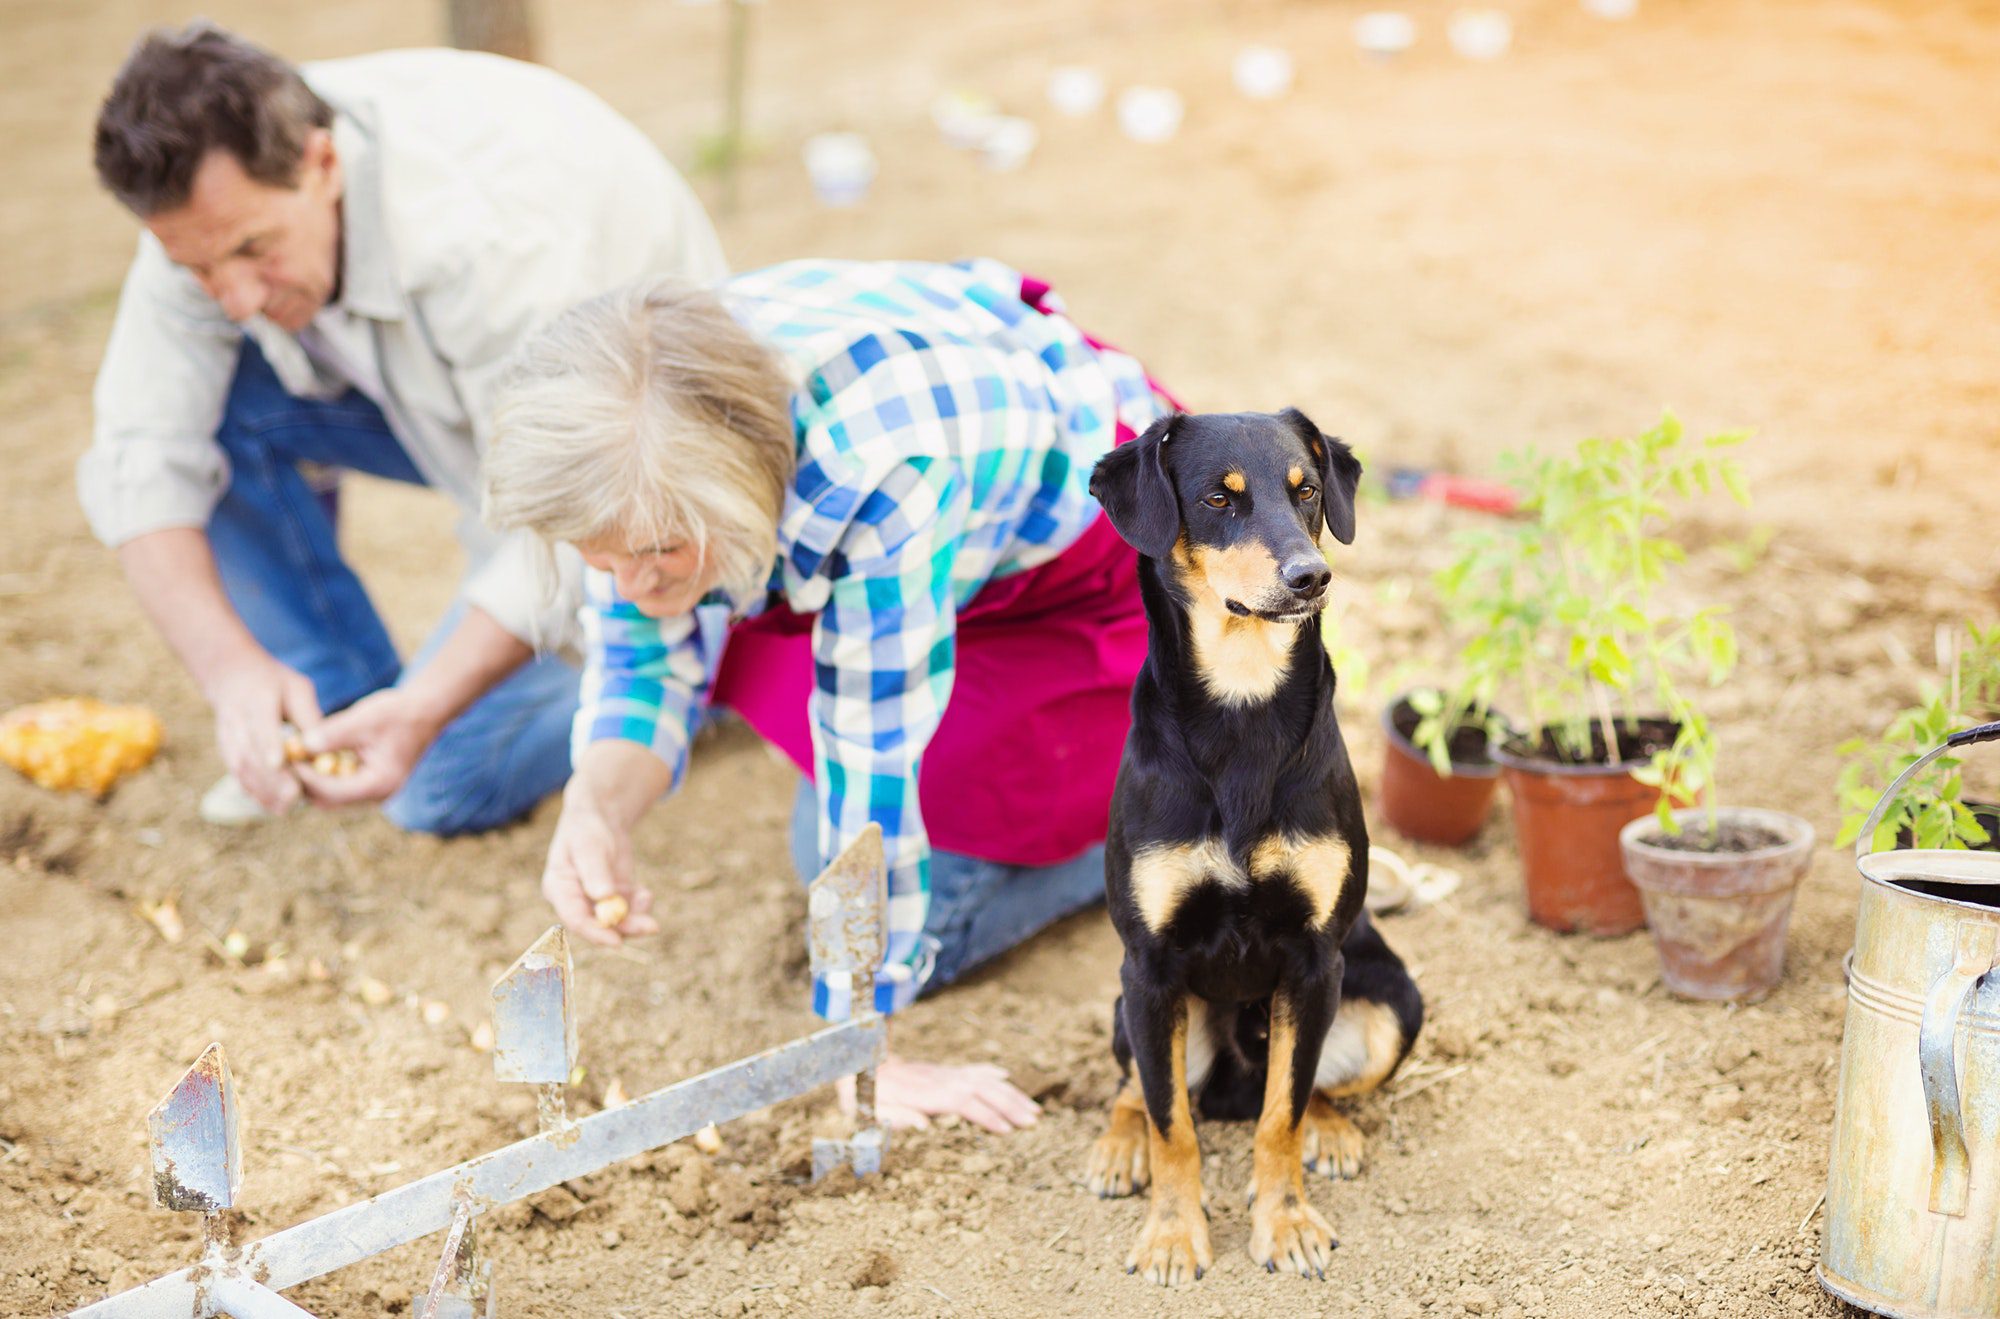 Seniors working in the garden as their dog watches and they discuss social security misconceptions.